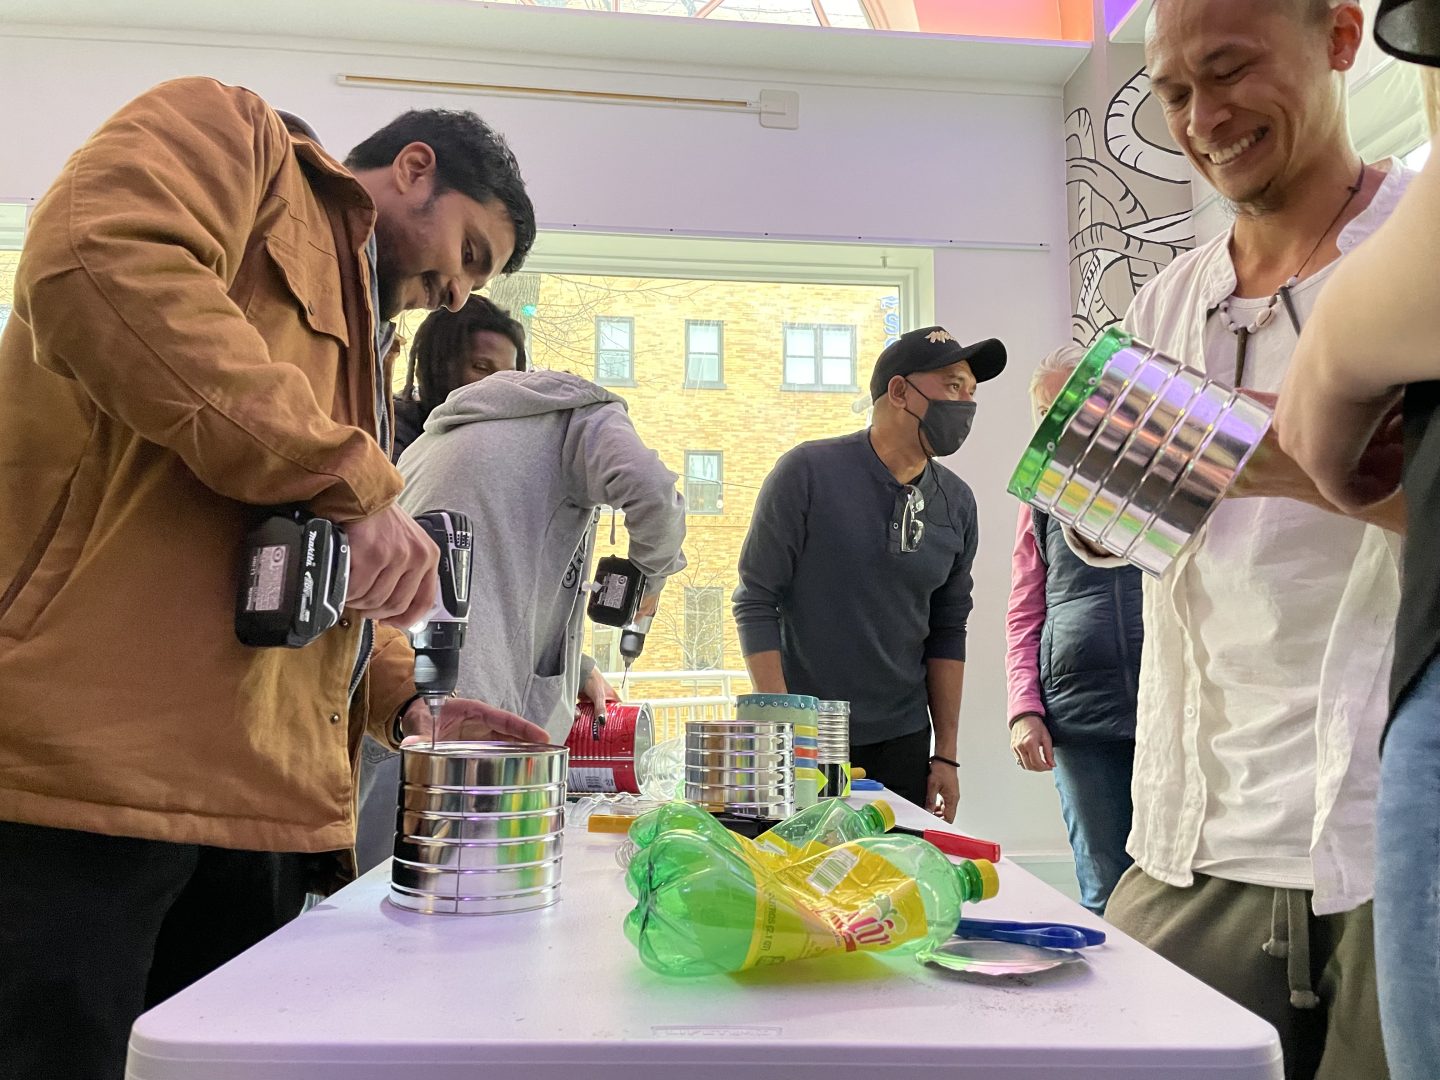 The Penn State Community made upcycled instruments at 3 Dots Downtown on April 5, 2022 with members of the band 